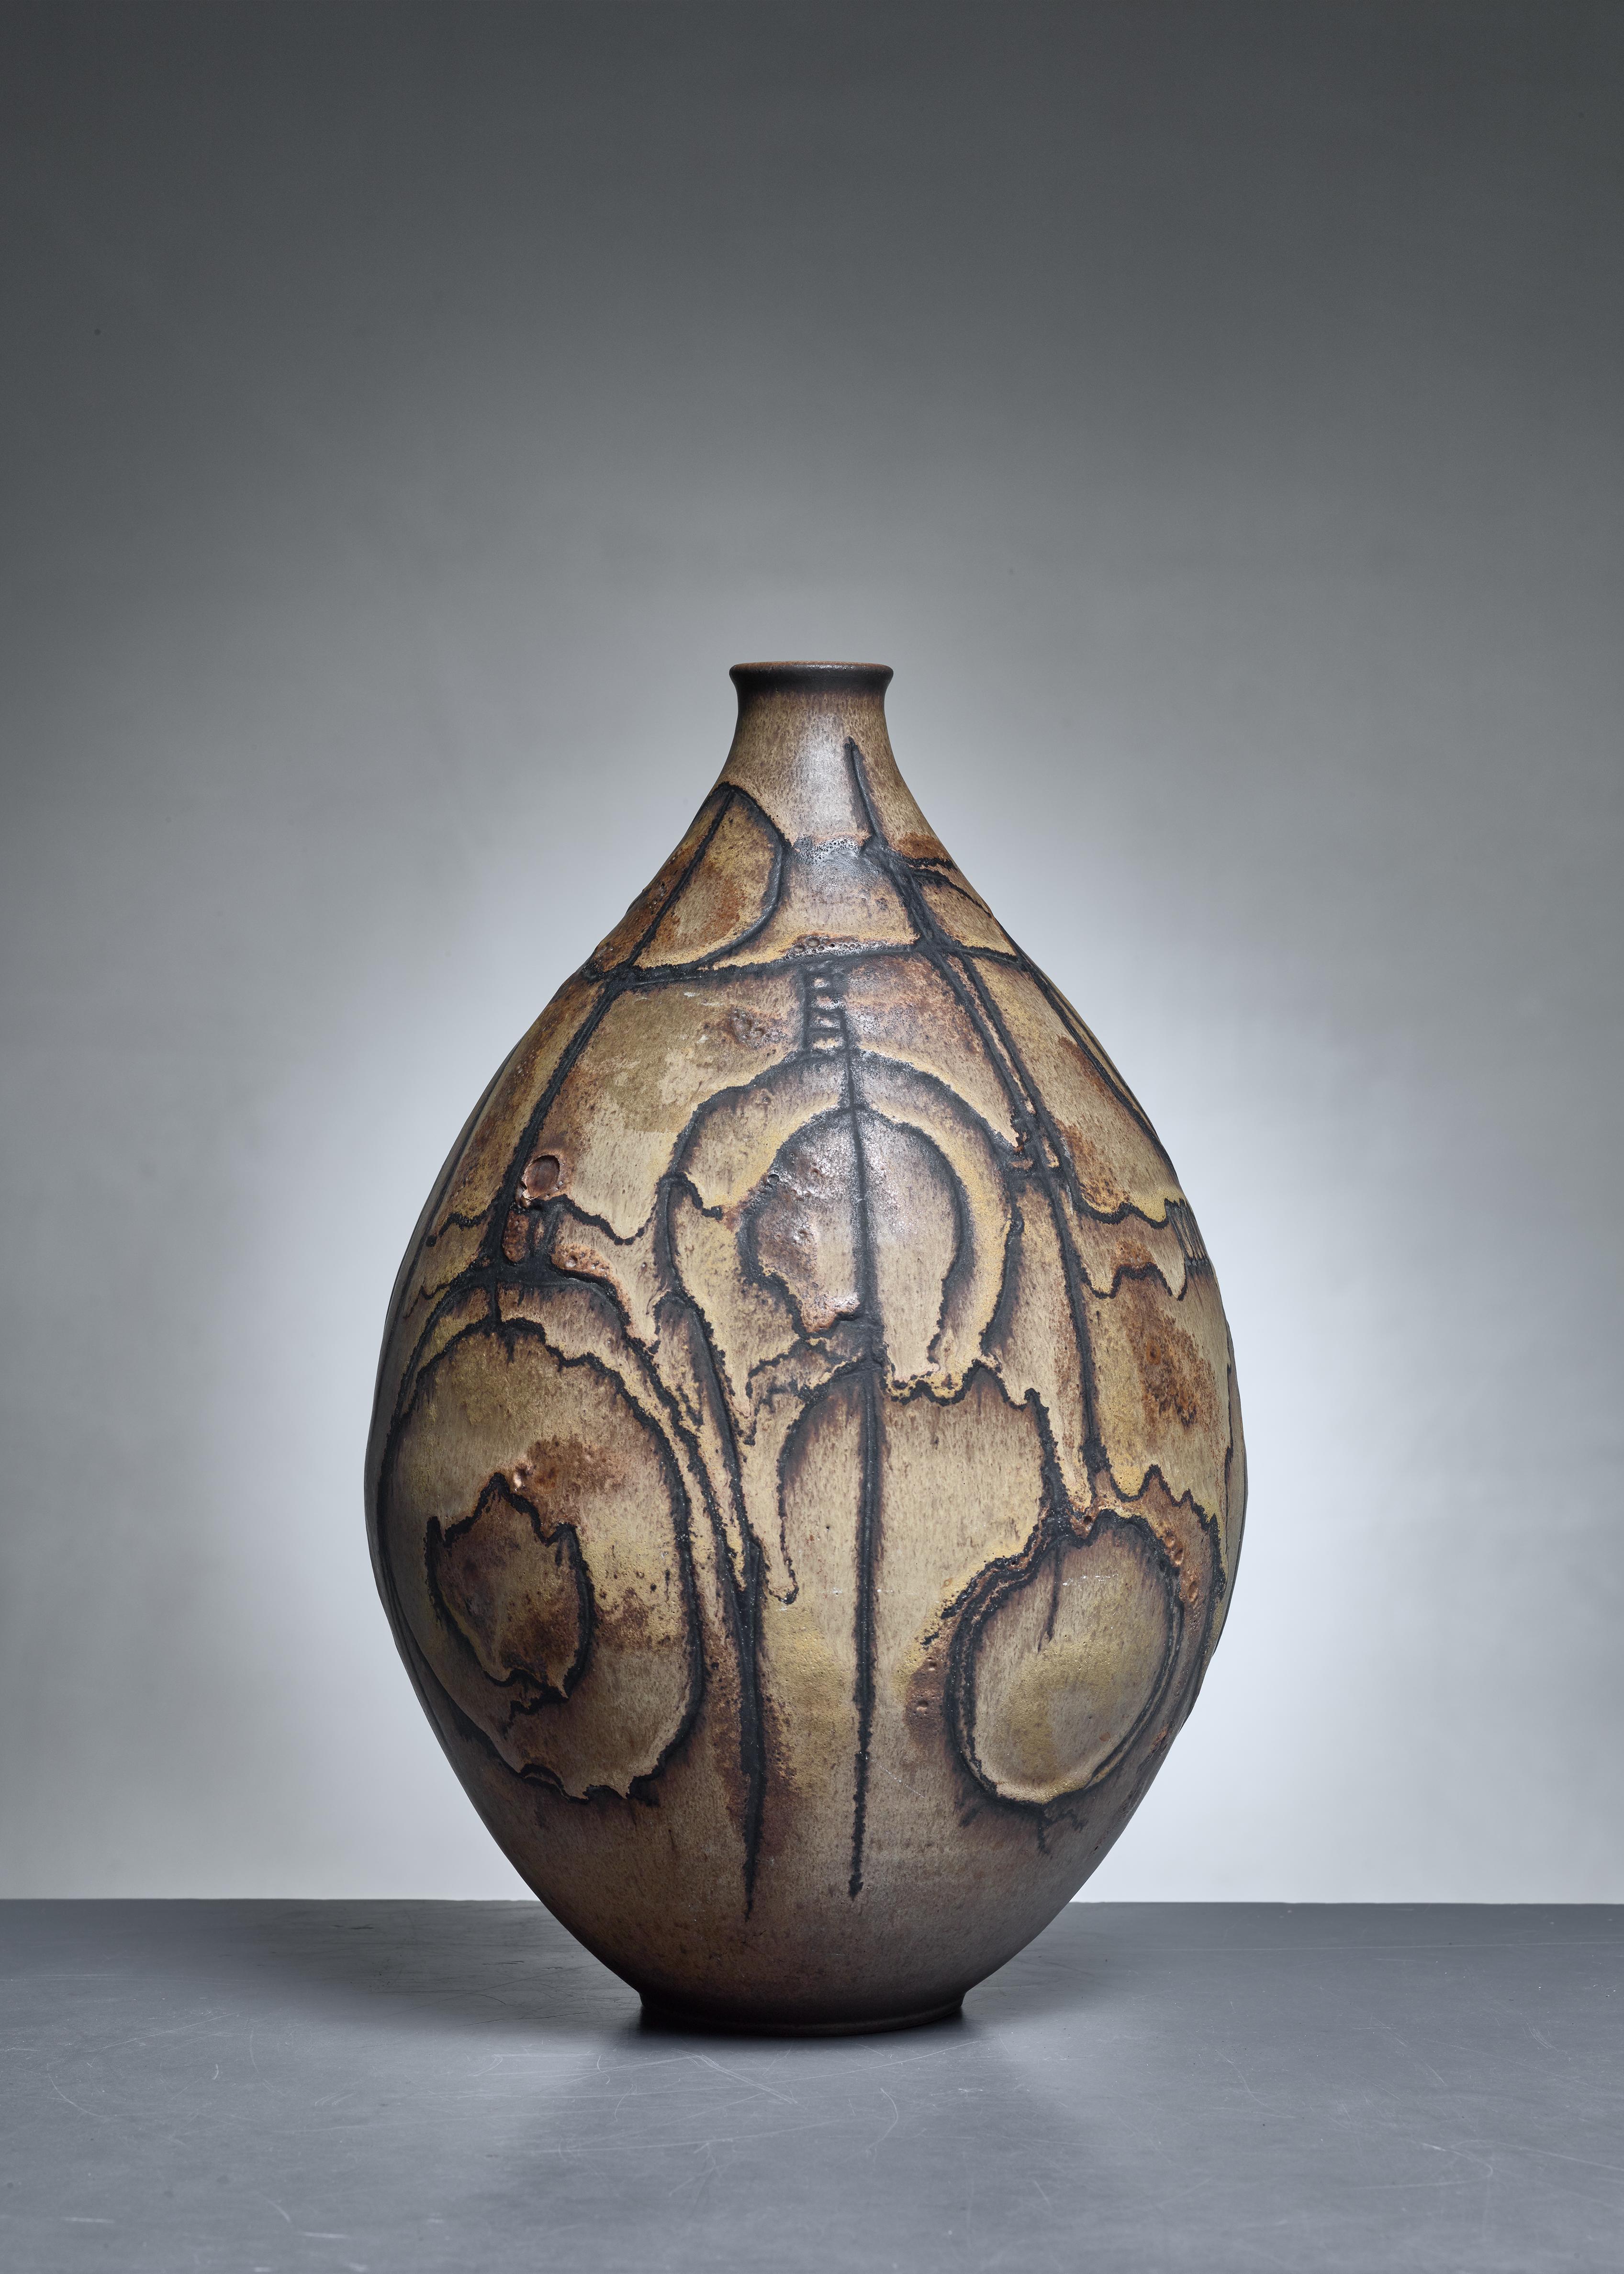 A studio craft vase in brown, decorated ceramic, by Clyde Burt (1922 - 1981). Signed CB underneath.

Burt was an Ohio ceramic artist. He studied at Fort Wayne Art School and the Cape Cod School of Art. He started his pottery studio in the early